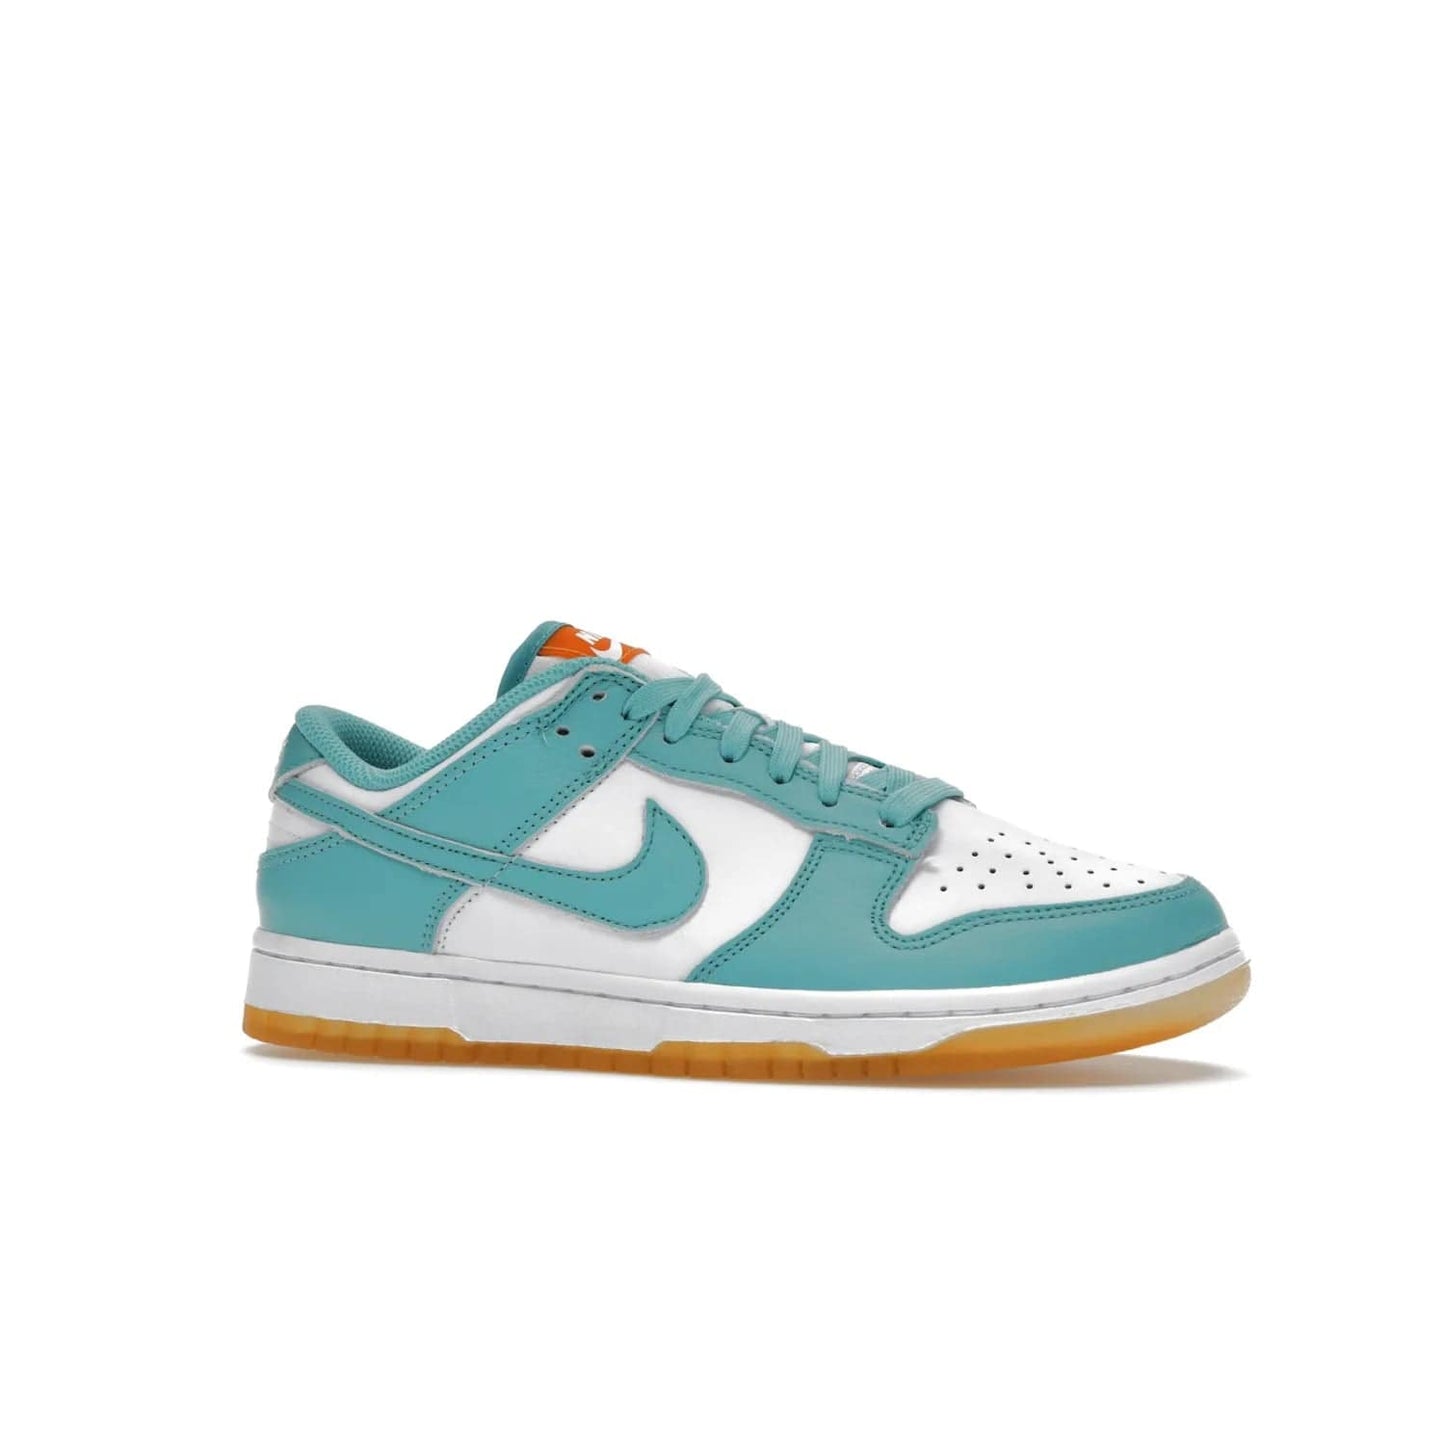 Nike Dunk Low Teal Zeal (Women's) - Image 3 - Only at www.BallersClubKickz.com - A white leather upper with teal overlays and Swooshes, plus yellow and embroidered accents make the Nike Dunk Low Teal Zeal (Women's) the perfect statement piece for any wardrobe.